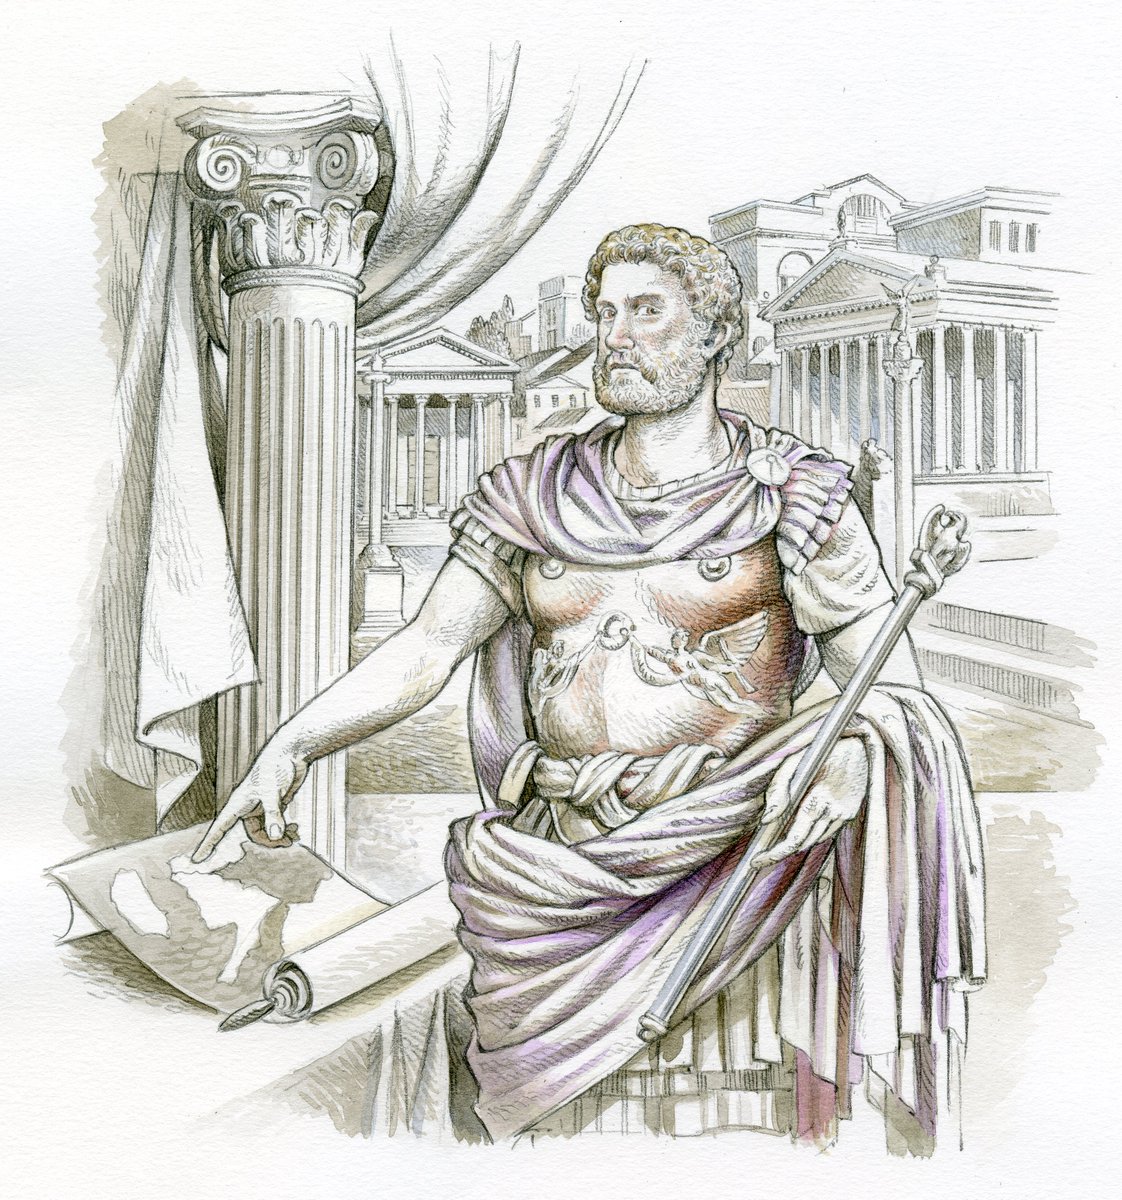 "The Caesar Cut"The Romans certainly had a keen sense of style, which was adopted to a greater or lesser degree in outlying regions of the Roman Empire, which briefly included southern Scotland. They also of course knew the therapeutic value of a good bath!